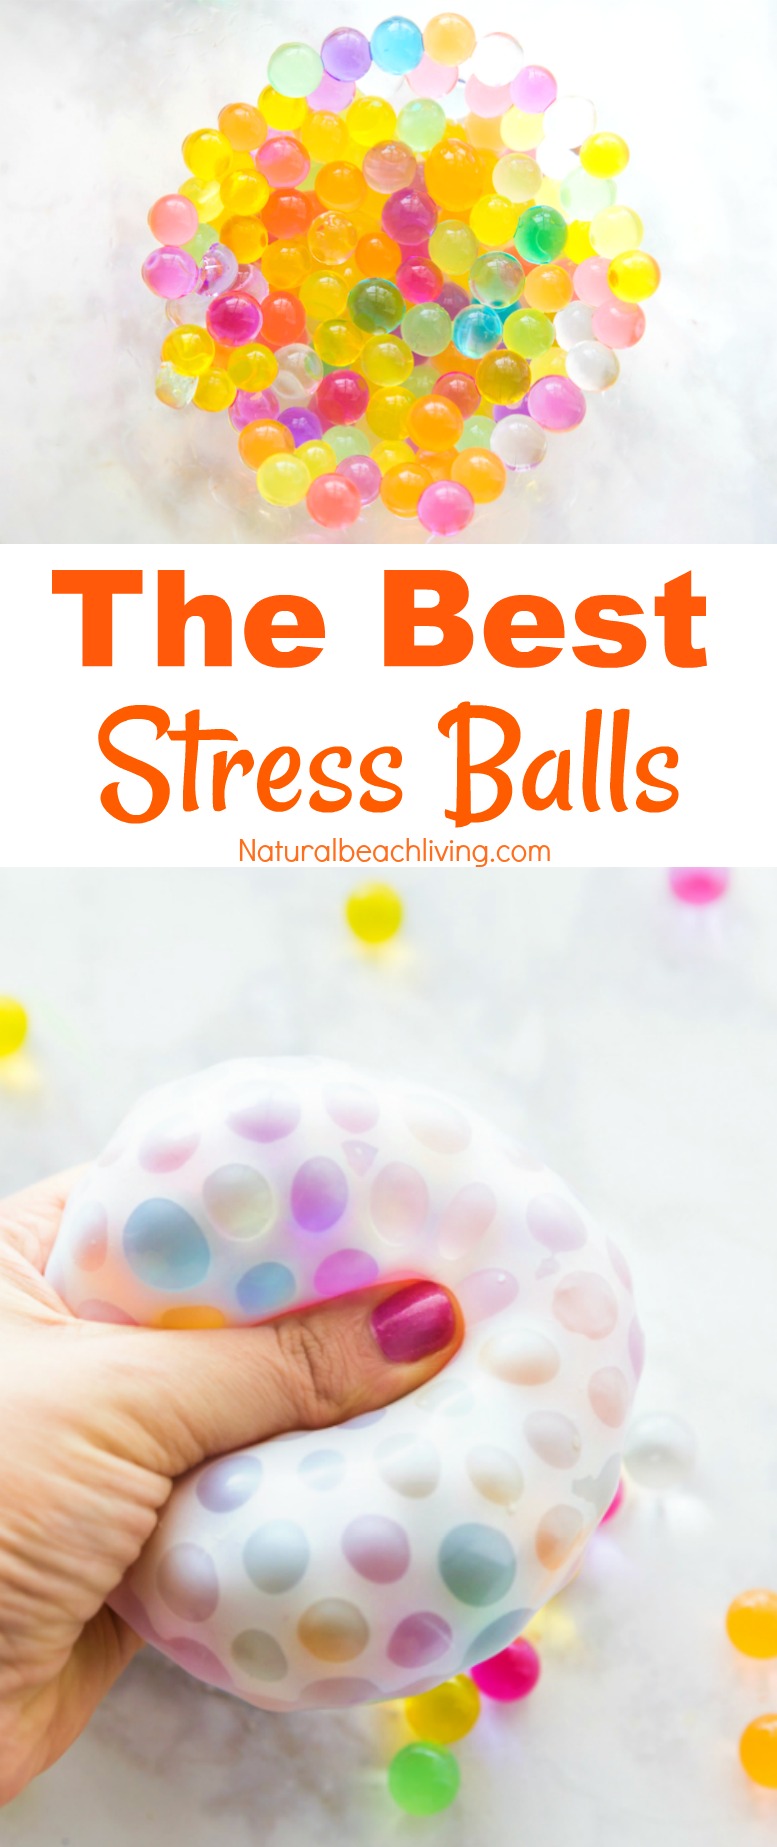 Make Stress Balls Kids Will Love with This Easy DIY Idea. These super cool squishy balls are perfect for fidgeters, children with Autism, Sensory Processing Disorder, and DIY Stress Balls are great for anxiety in kids & adults too. See How to Make a Stress Ball with only 2 simple things. 